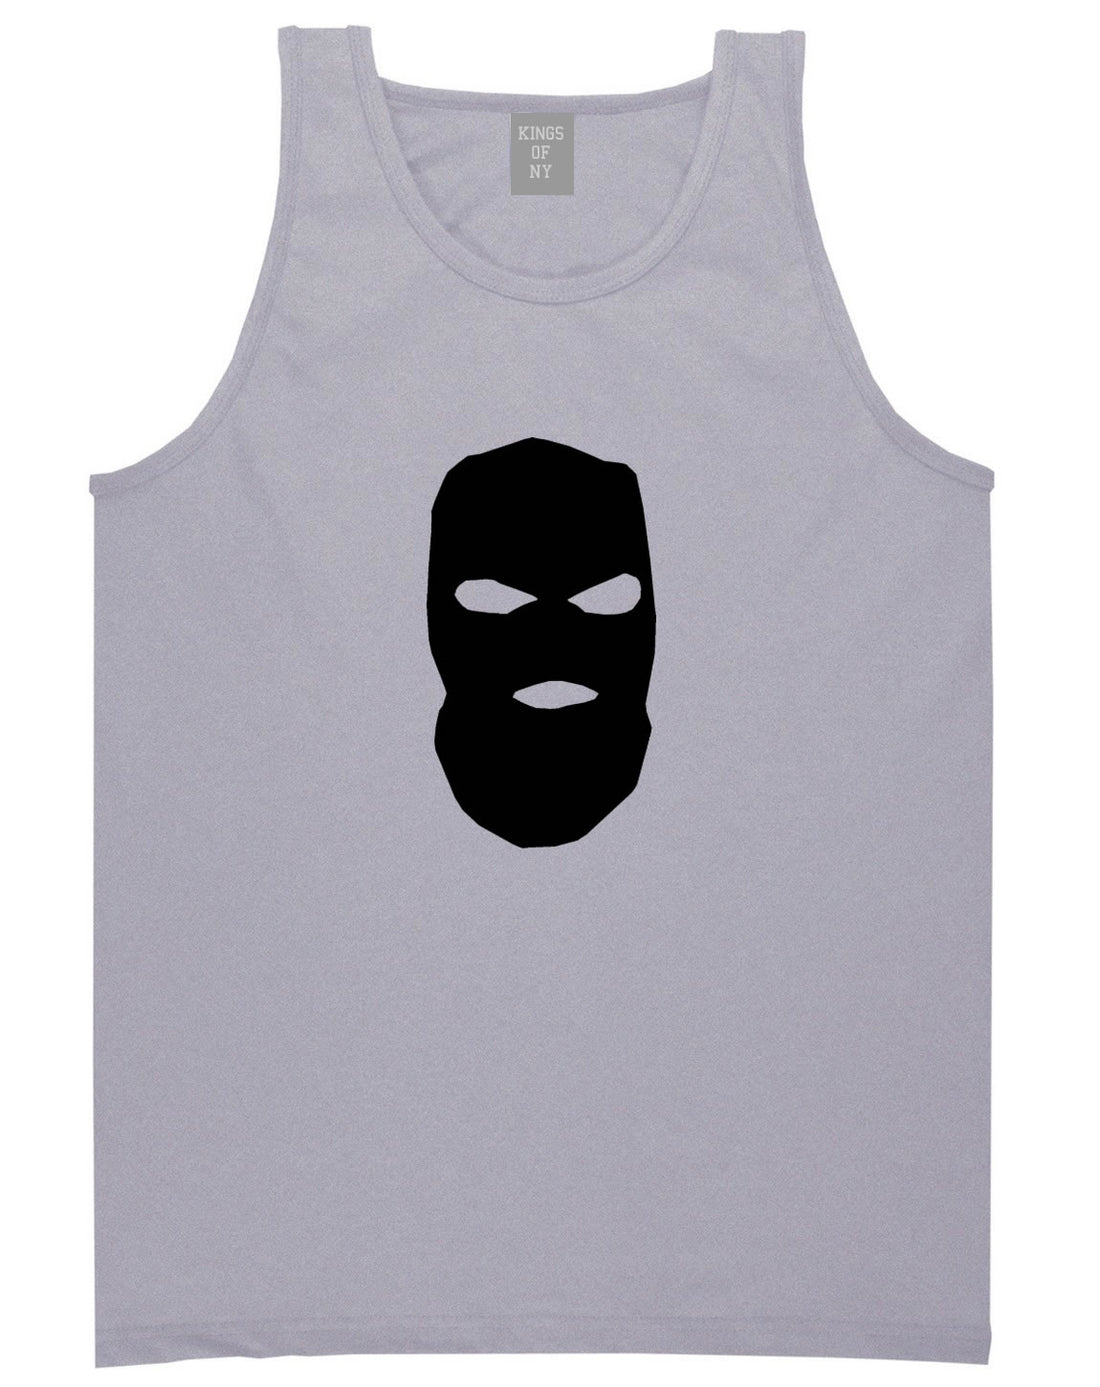 Ski Mask Way Robber Tank Top in Grey By Kings Of NY